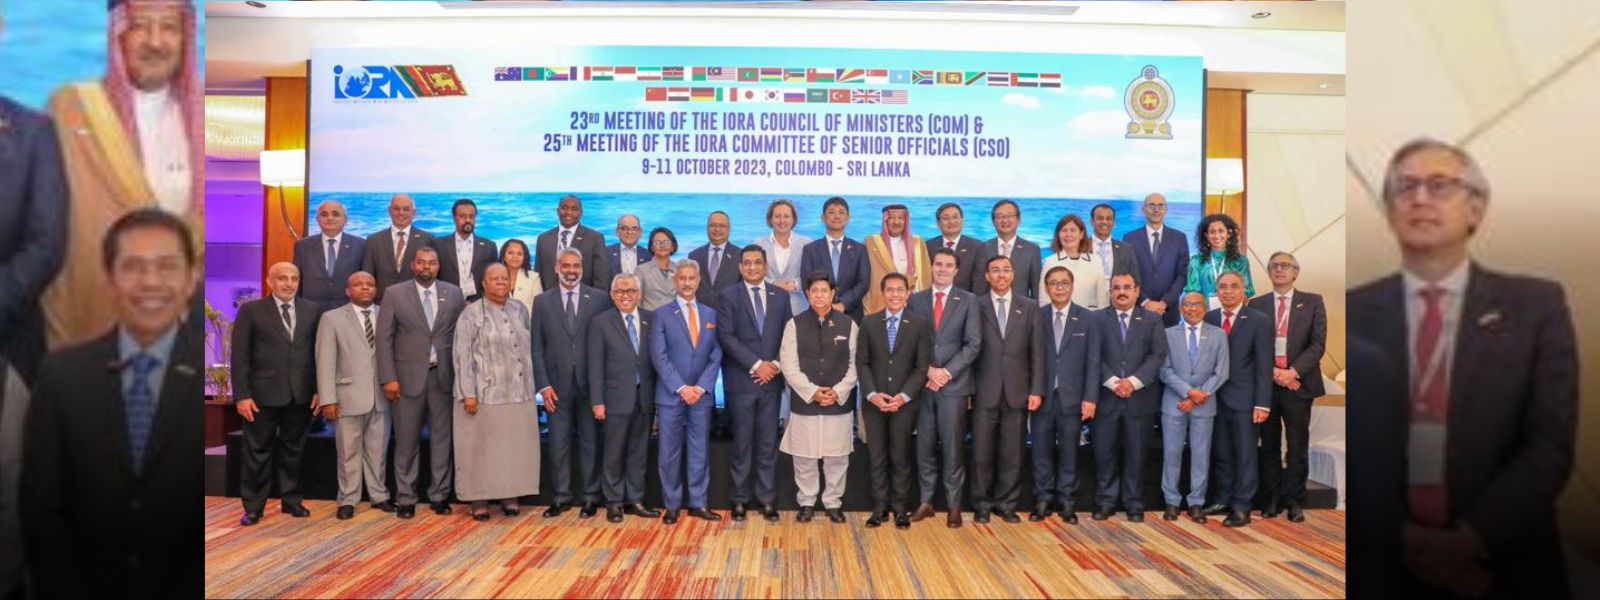 23rd COM Meeting of IORA concludes in Colombo